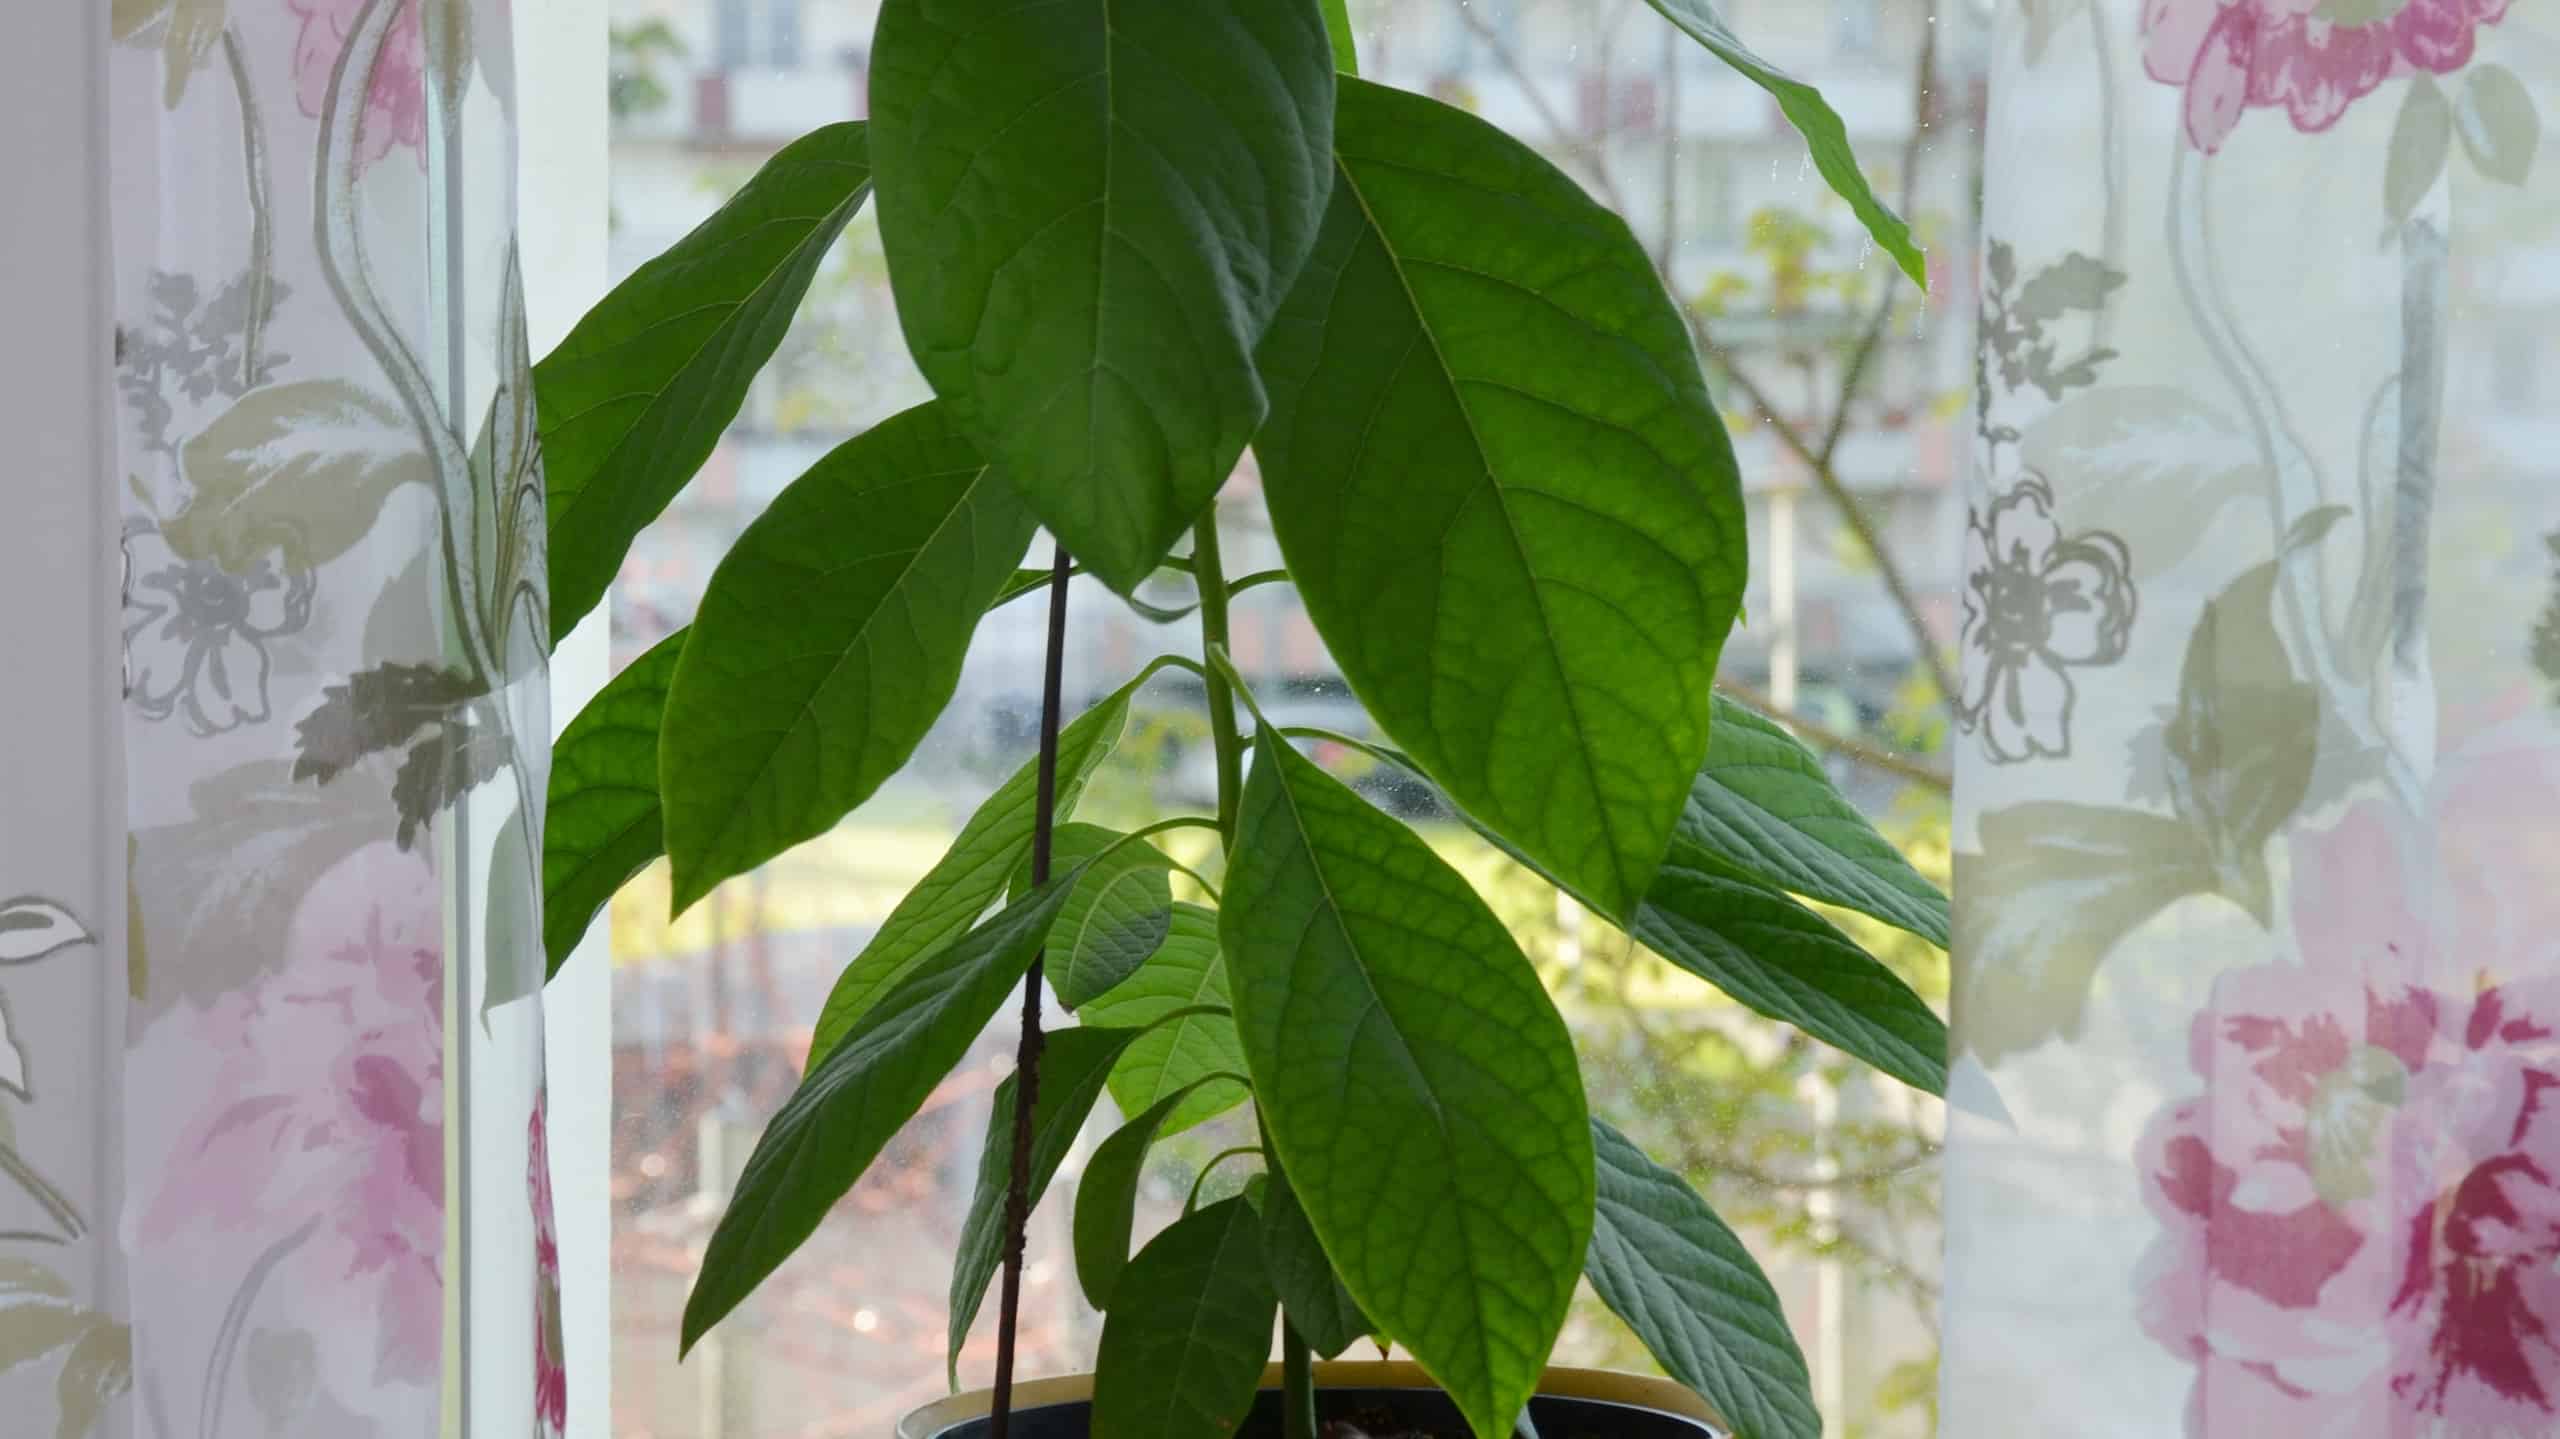 An avocado plant is visible center frame in a sunny window,. The plot is in a terracotta pot. The plant is probably about 2 feet tall with 20ish leaves. the leaves are spear-shaped and glossy green. Sheer white drapes with pink accents flank the plant.